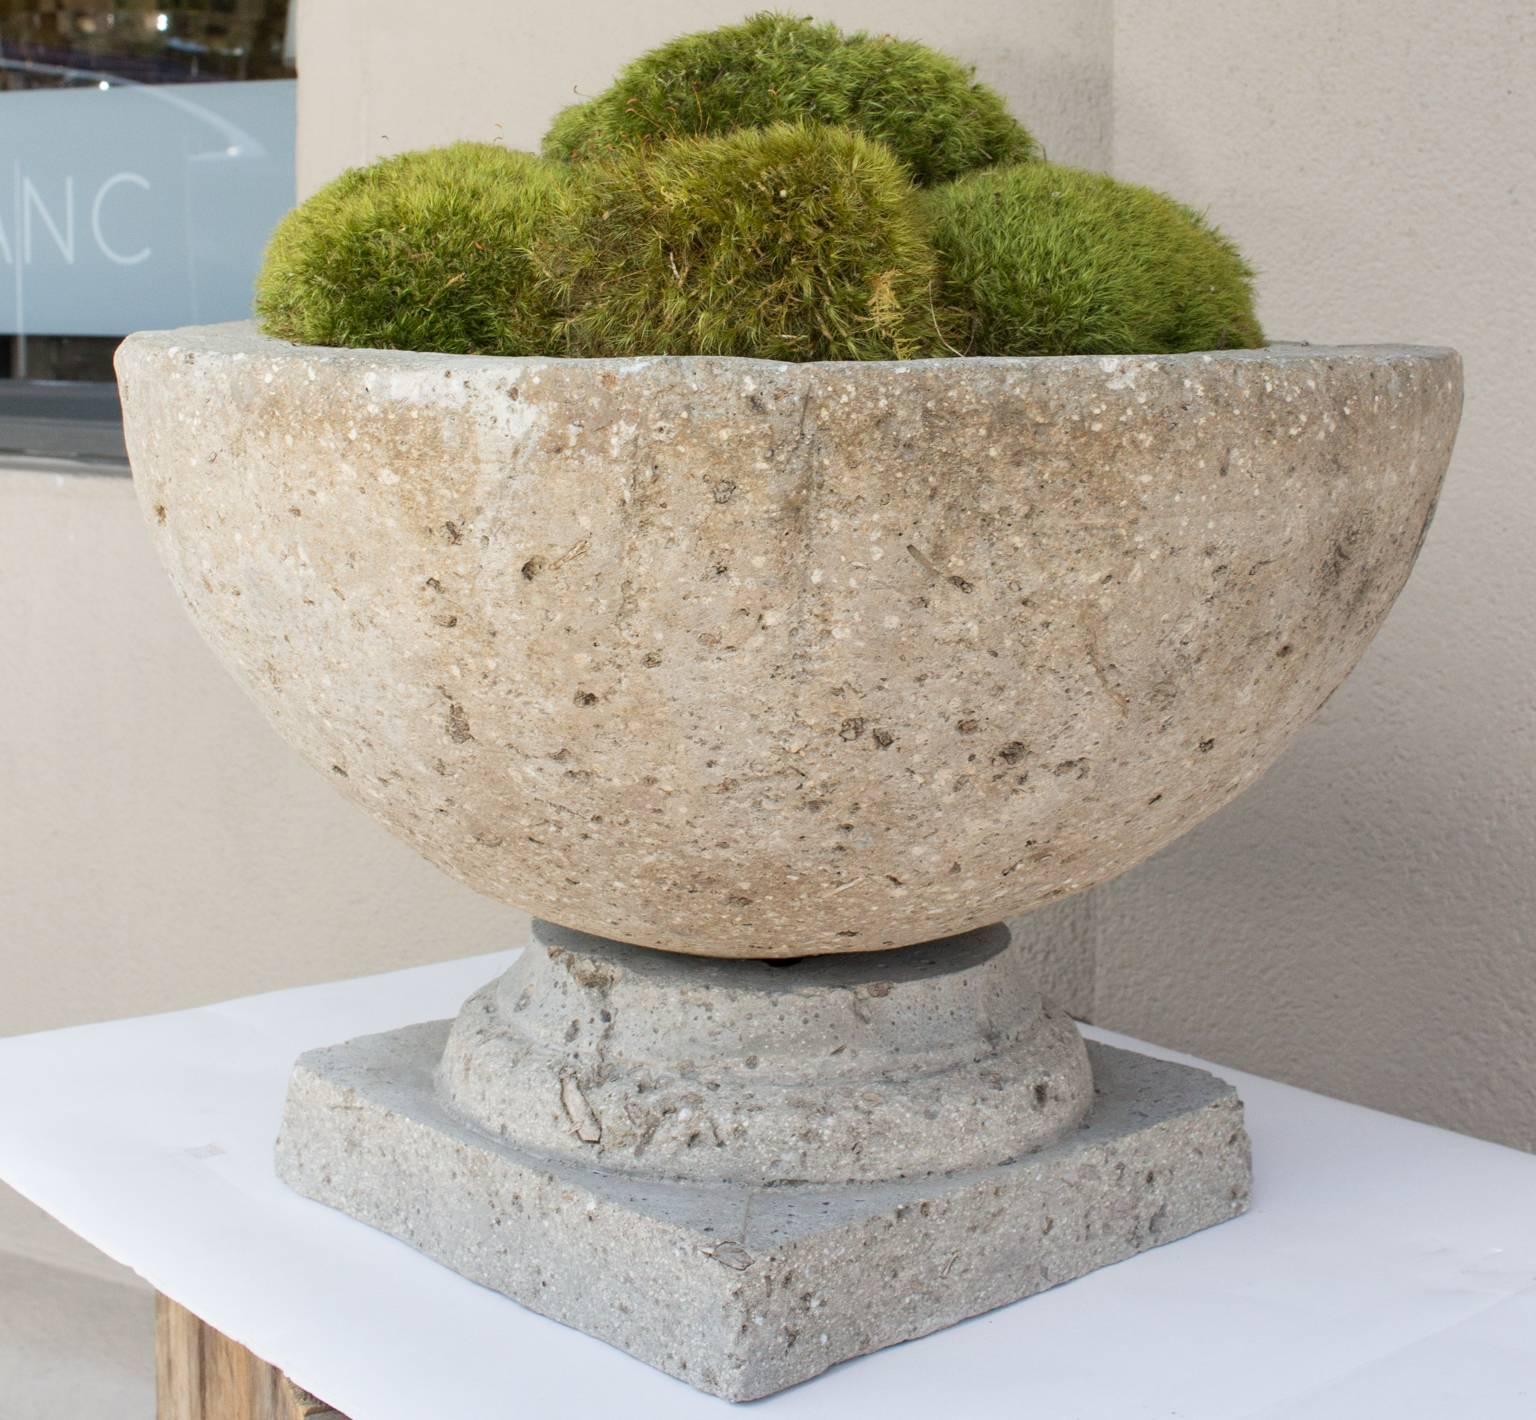 This stone centerpiece is actually made up of two separate pieces, the square base is cast stone and the bowl on top is cast hypertufa, which is an expanded stone that is slightly lighter than concrete. The bowl has been piled high with preserved